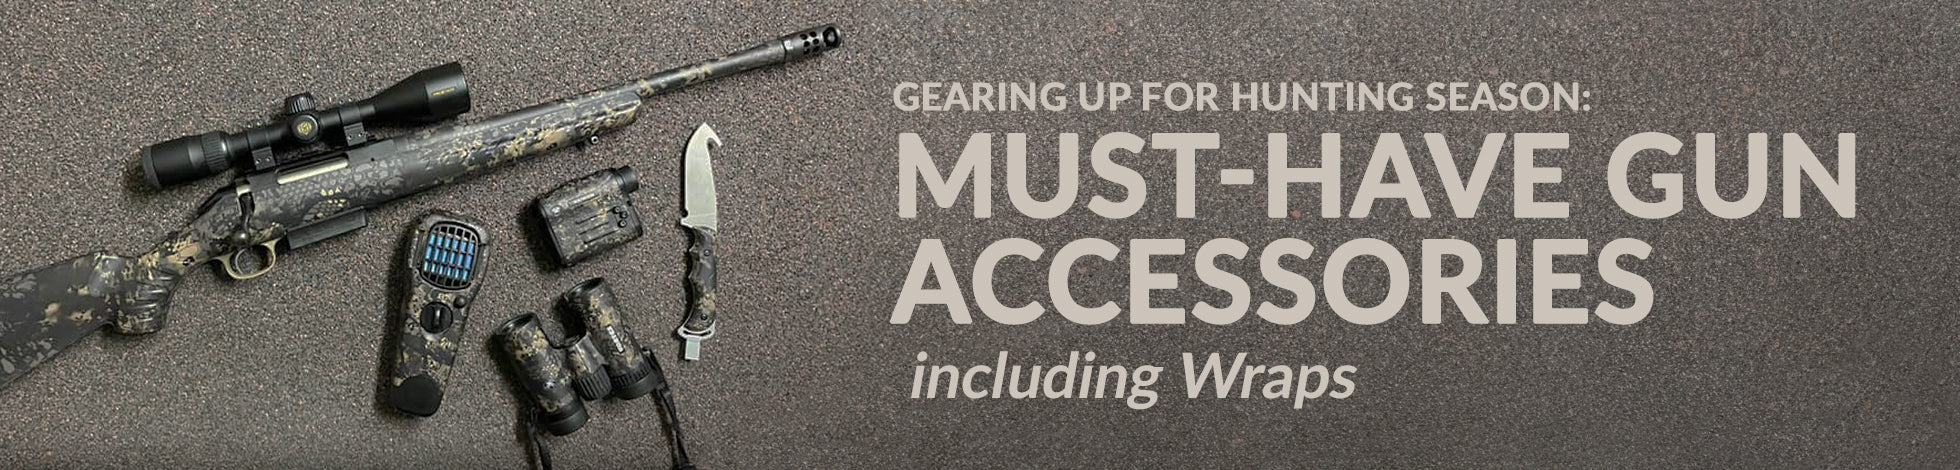 Gearing Up for Hunting Season: Must-Have Gun Accessories, including Wraps